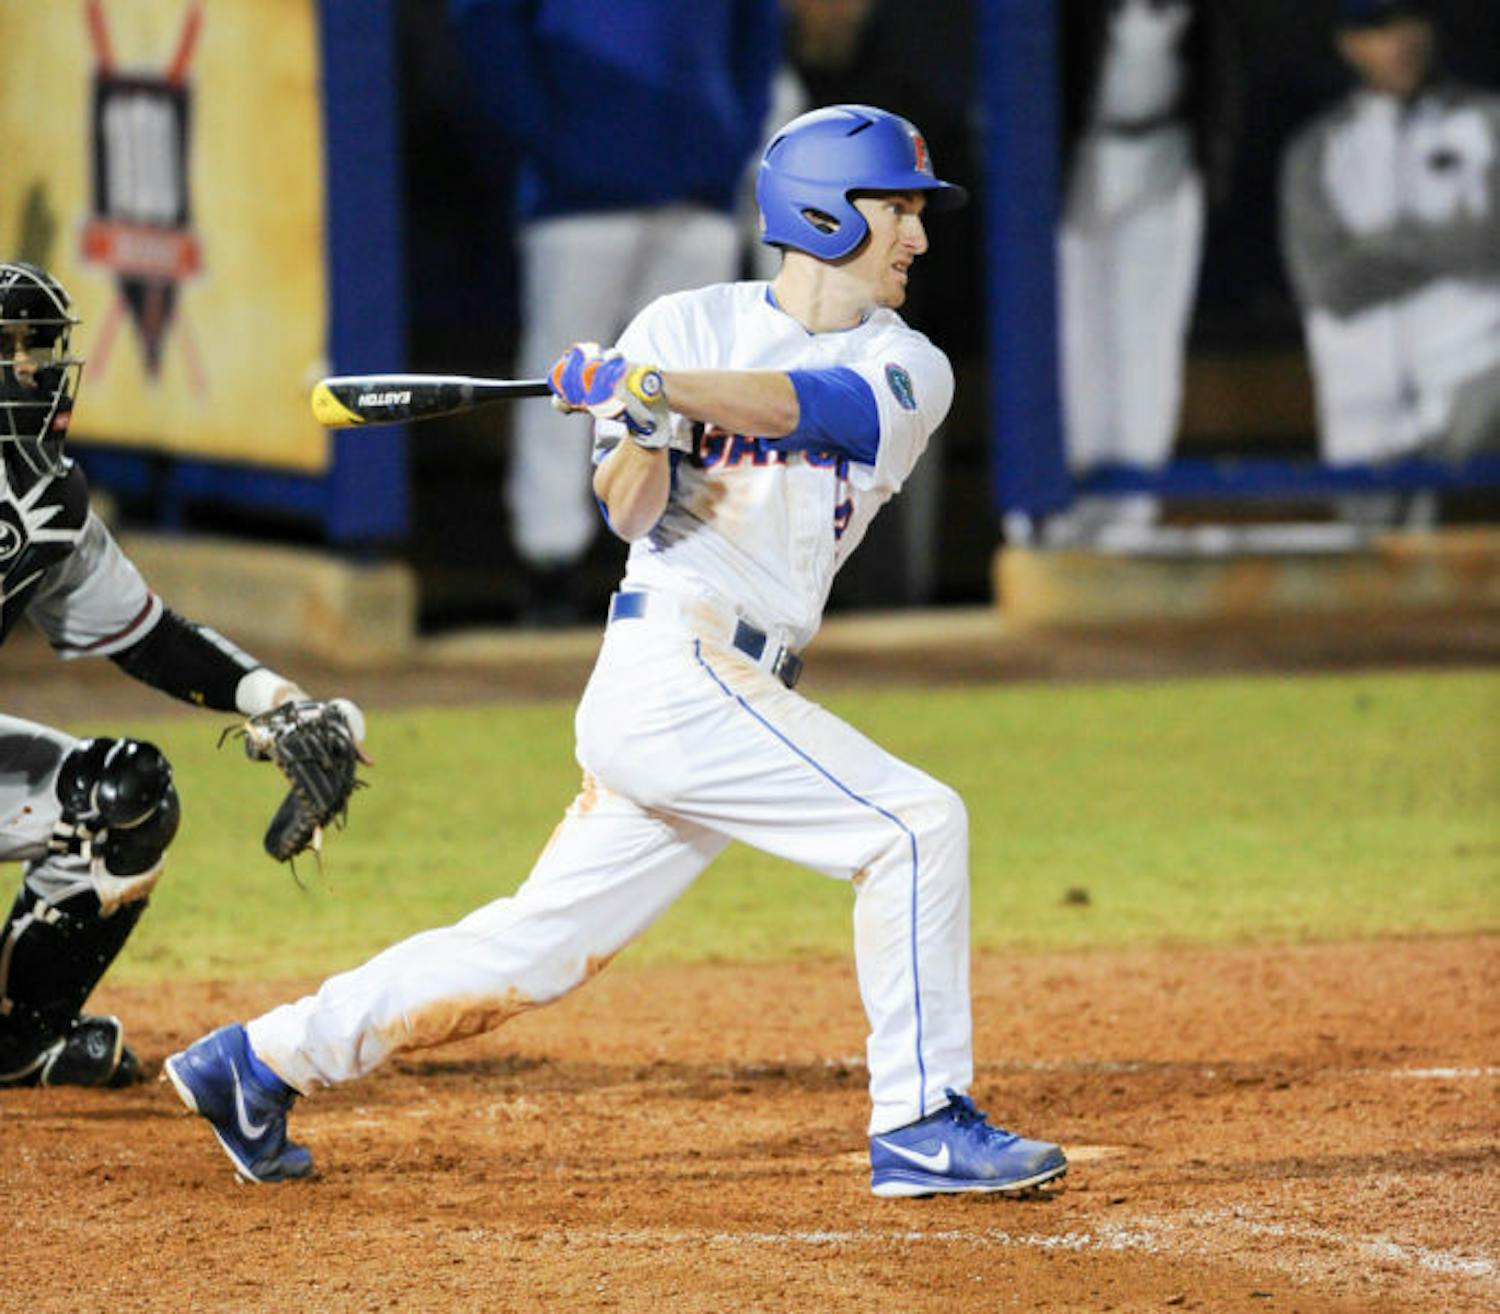 Casey Turgeon swings during Florida’s 4-0 win against Maryland on Feb. 14 at McKethan Stadium.